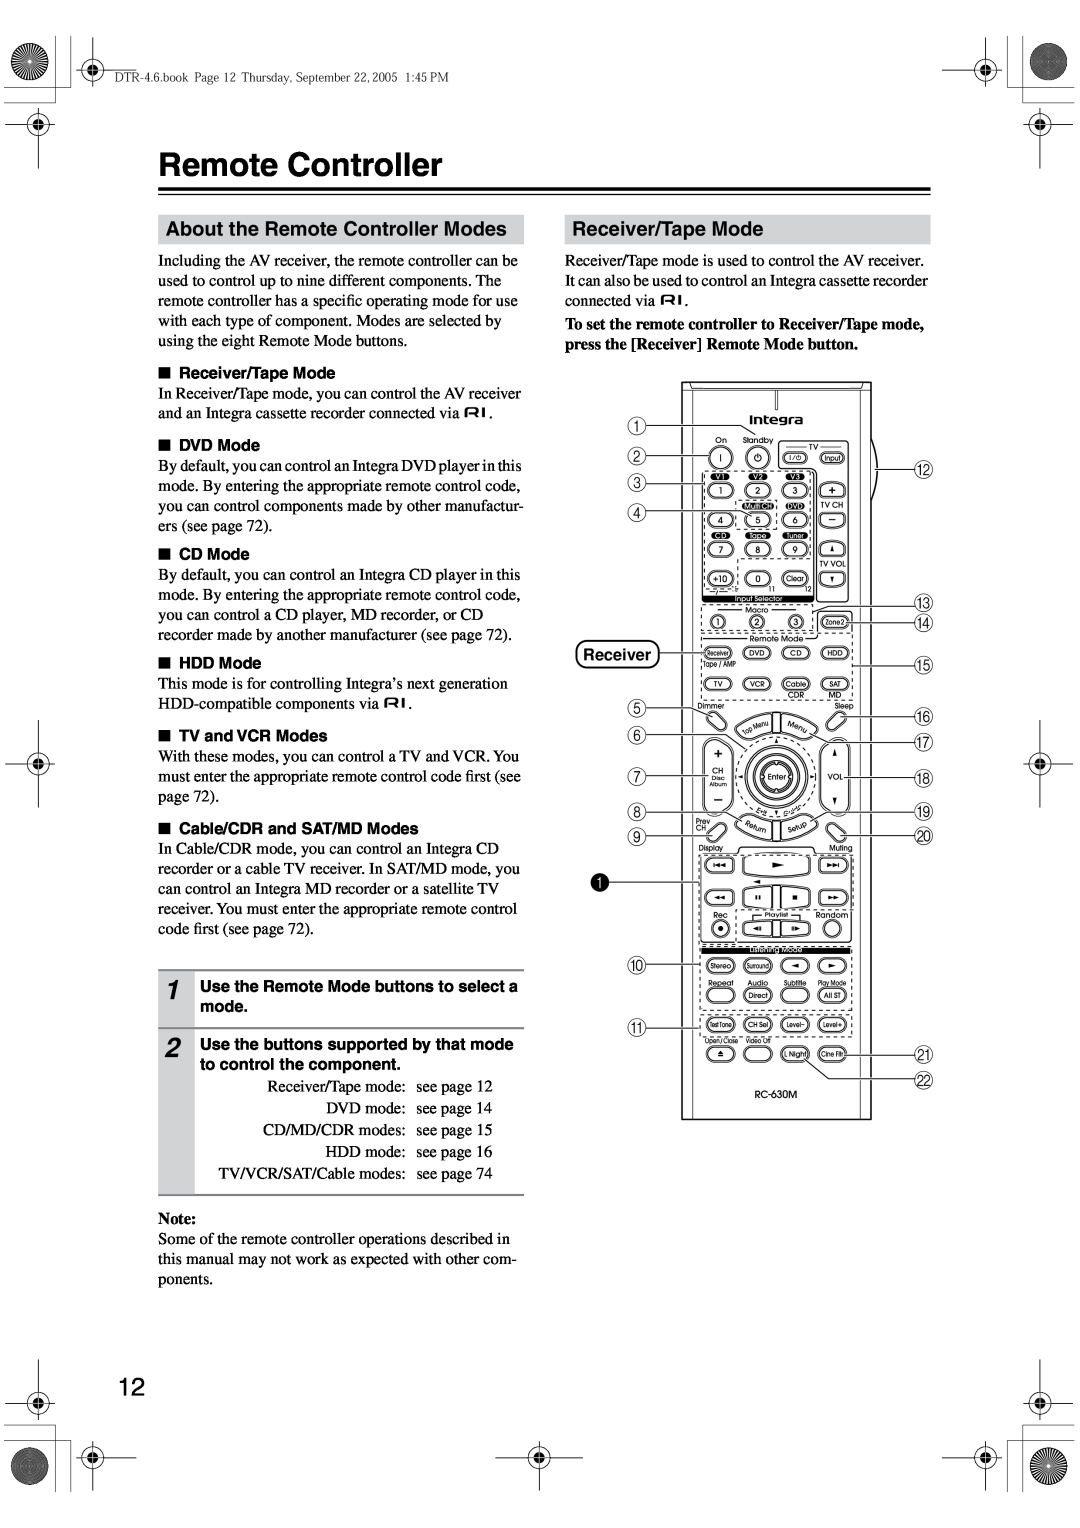 Integra DTR-4.6 instruction manual About the Remote Controller Modes, Receiver/Tape Mode 